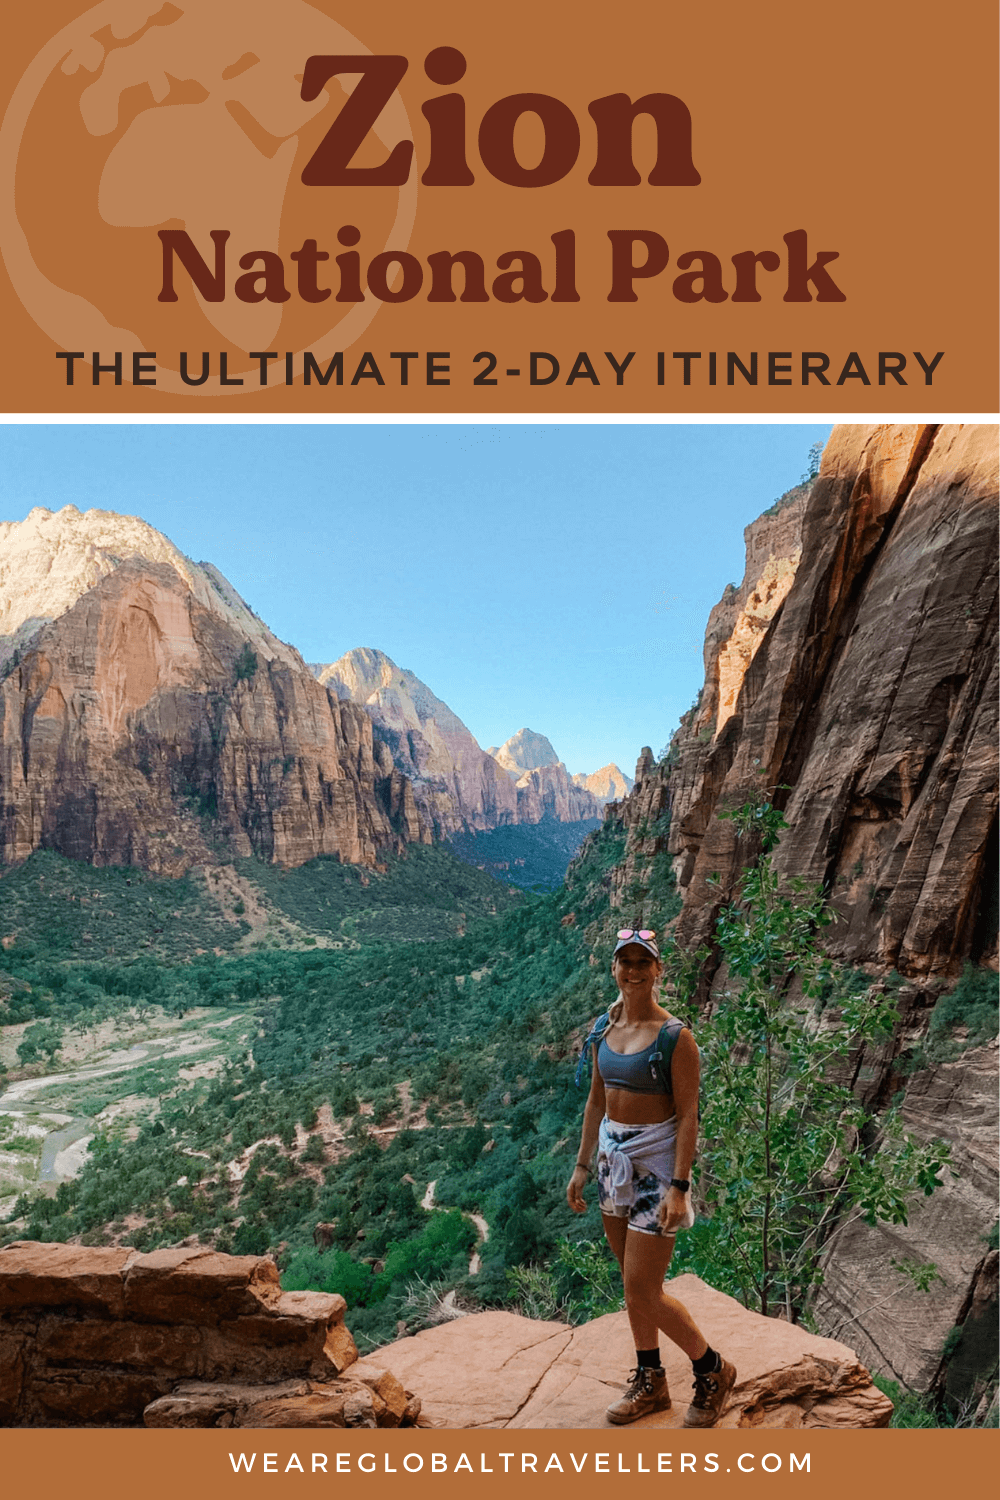 A 2-day itinerary for Zion National Park, Utah